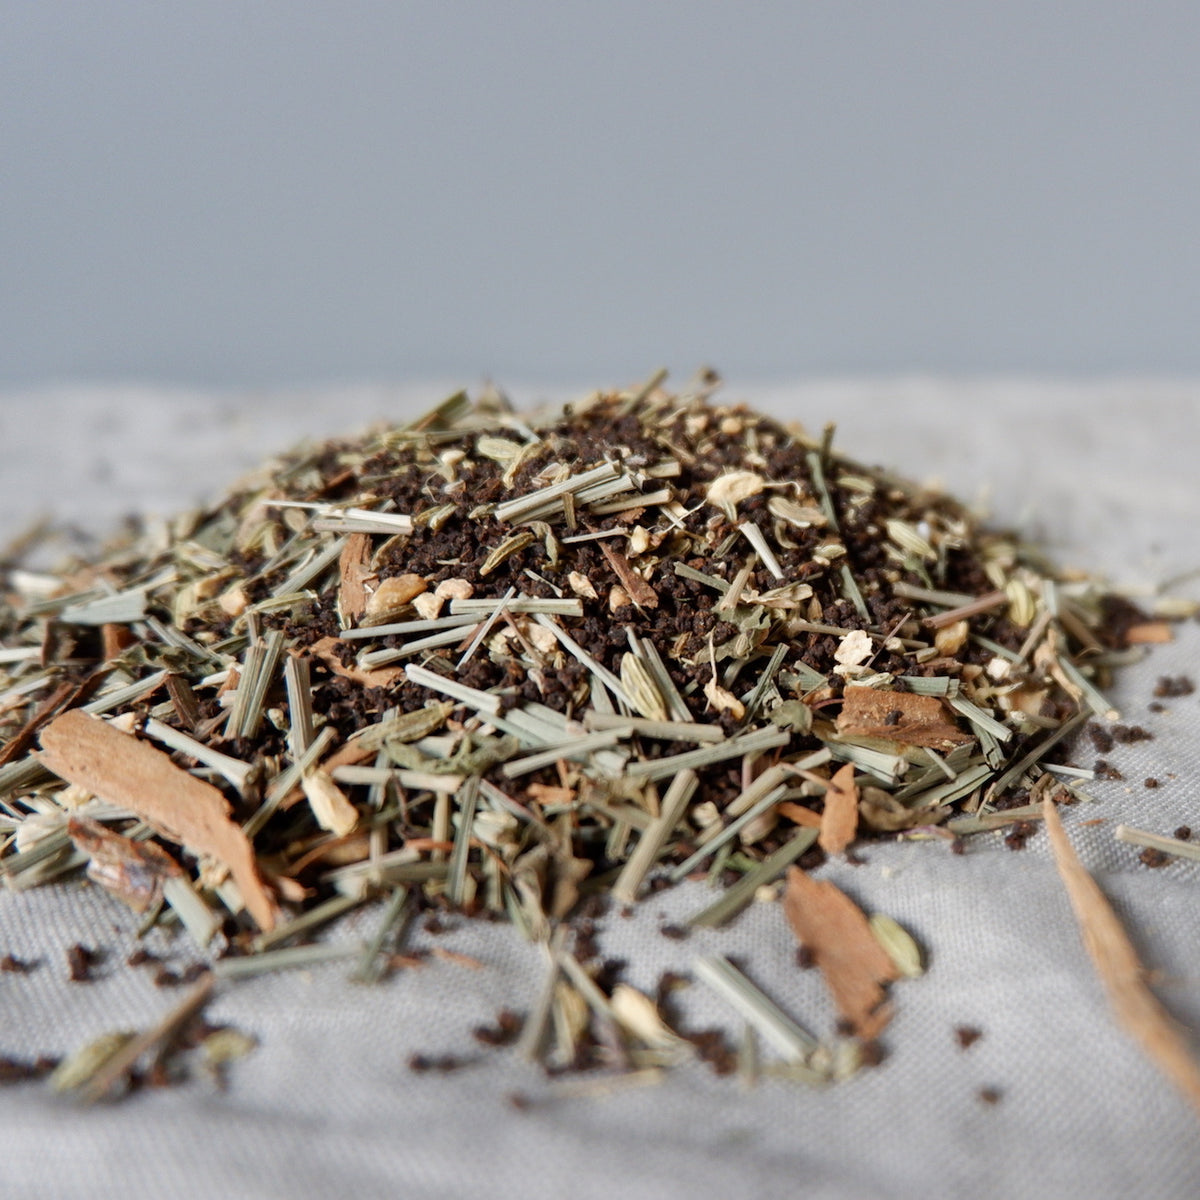 The story behind our Lemongrass Chai